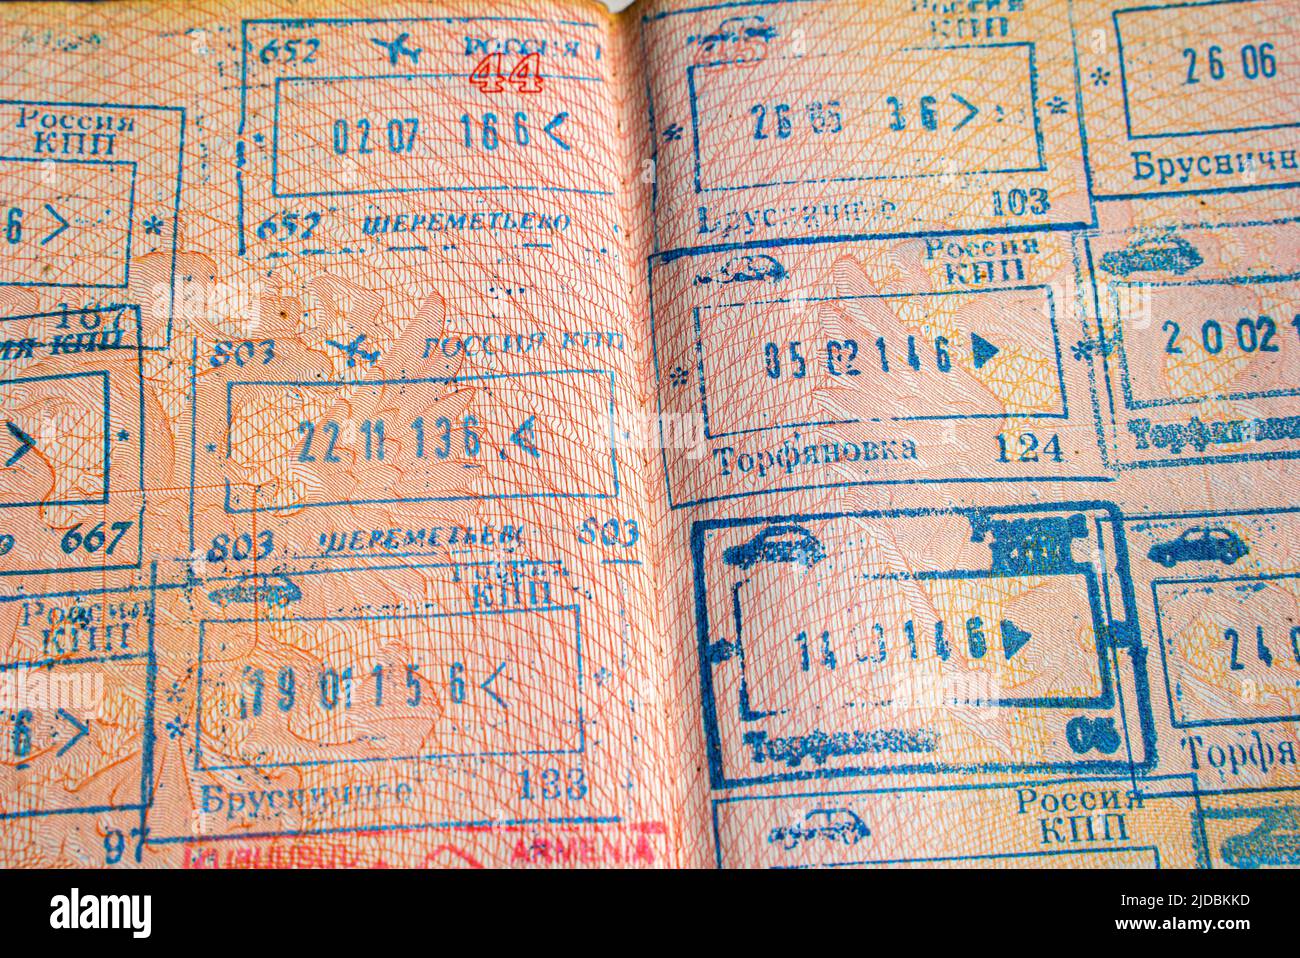 Border crossing stamps with names of the Russian border points in an open Russian passport Stock Photo